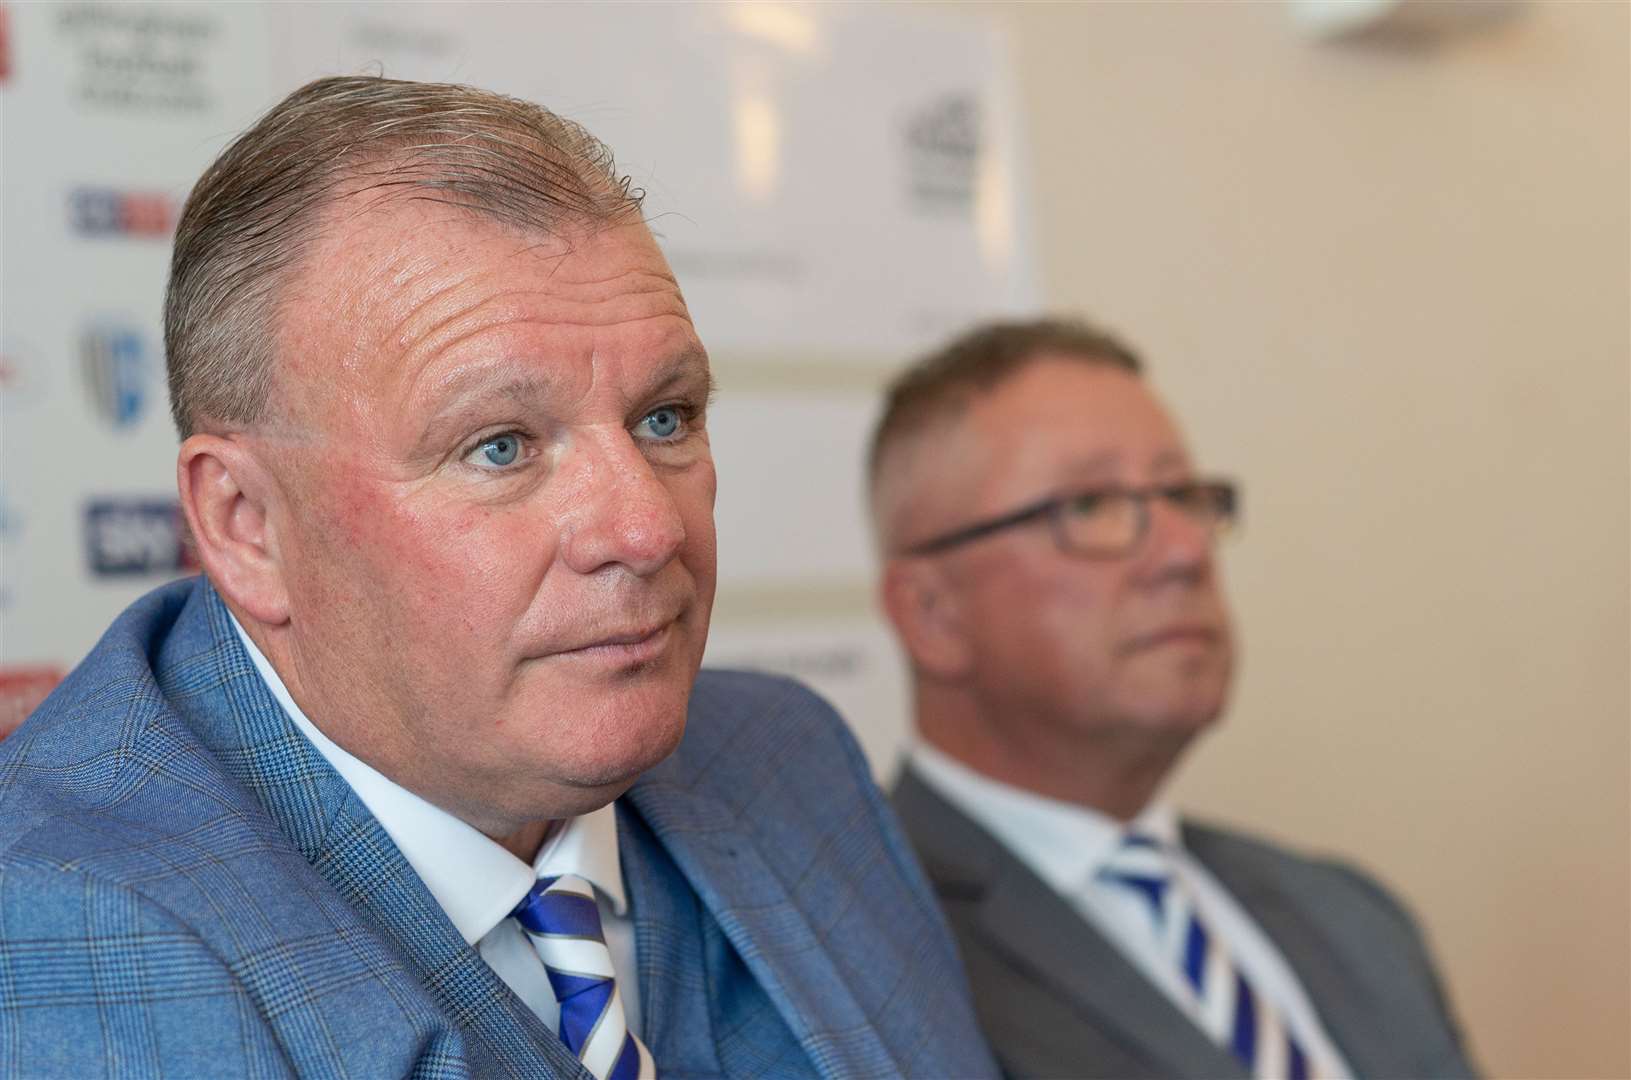 Gillingham manager Steve Evans had had a busy few days